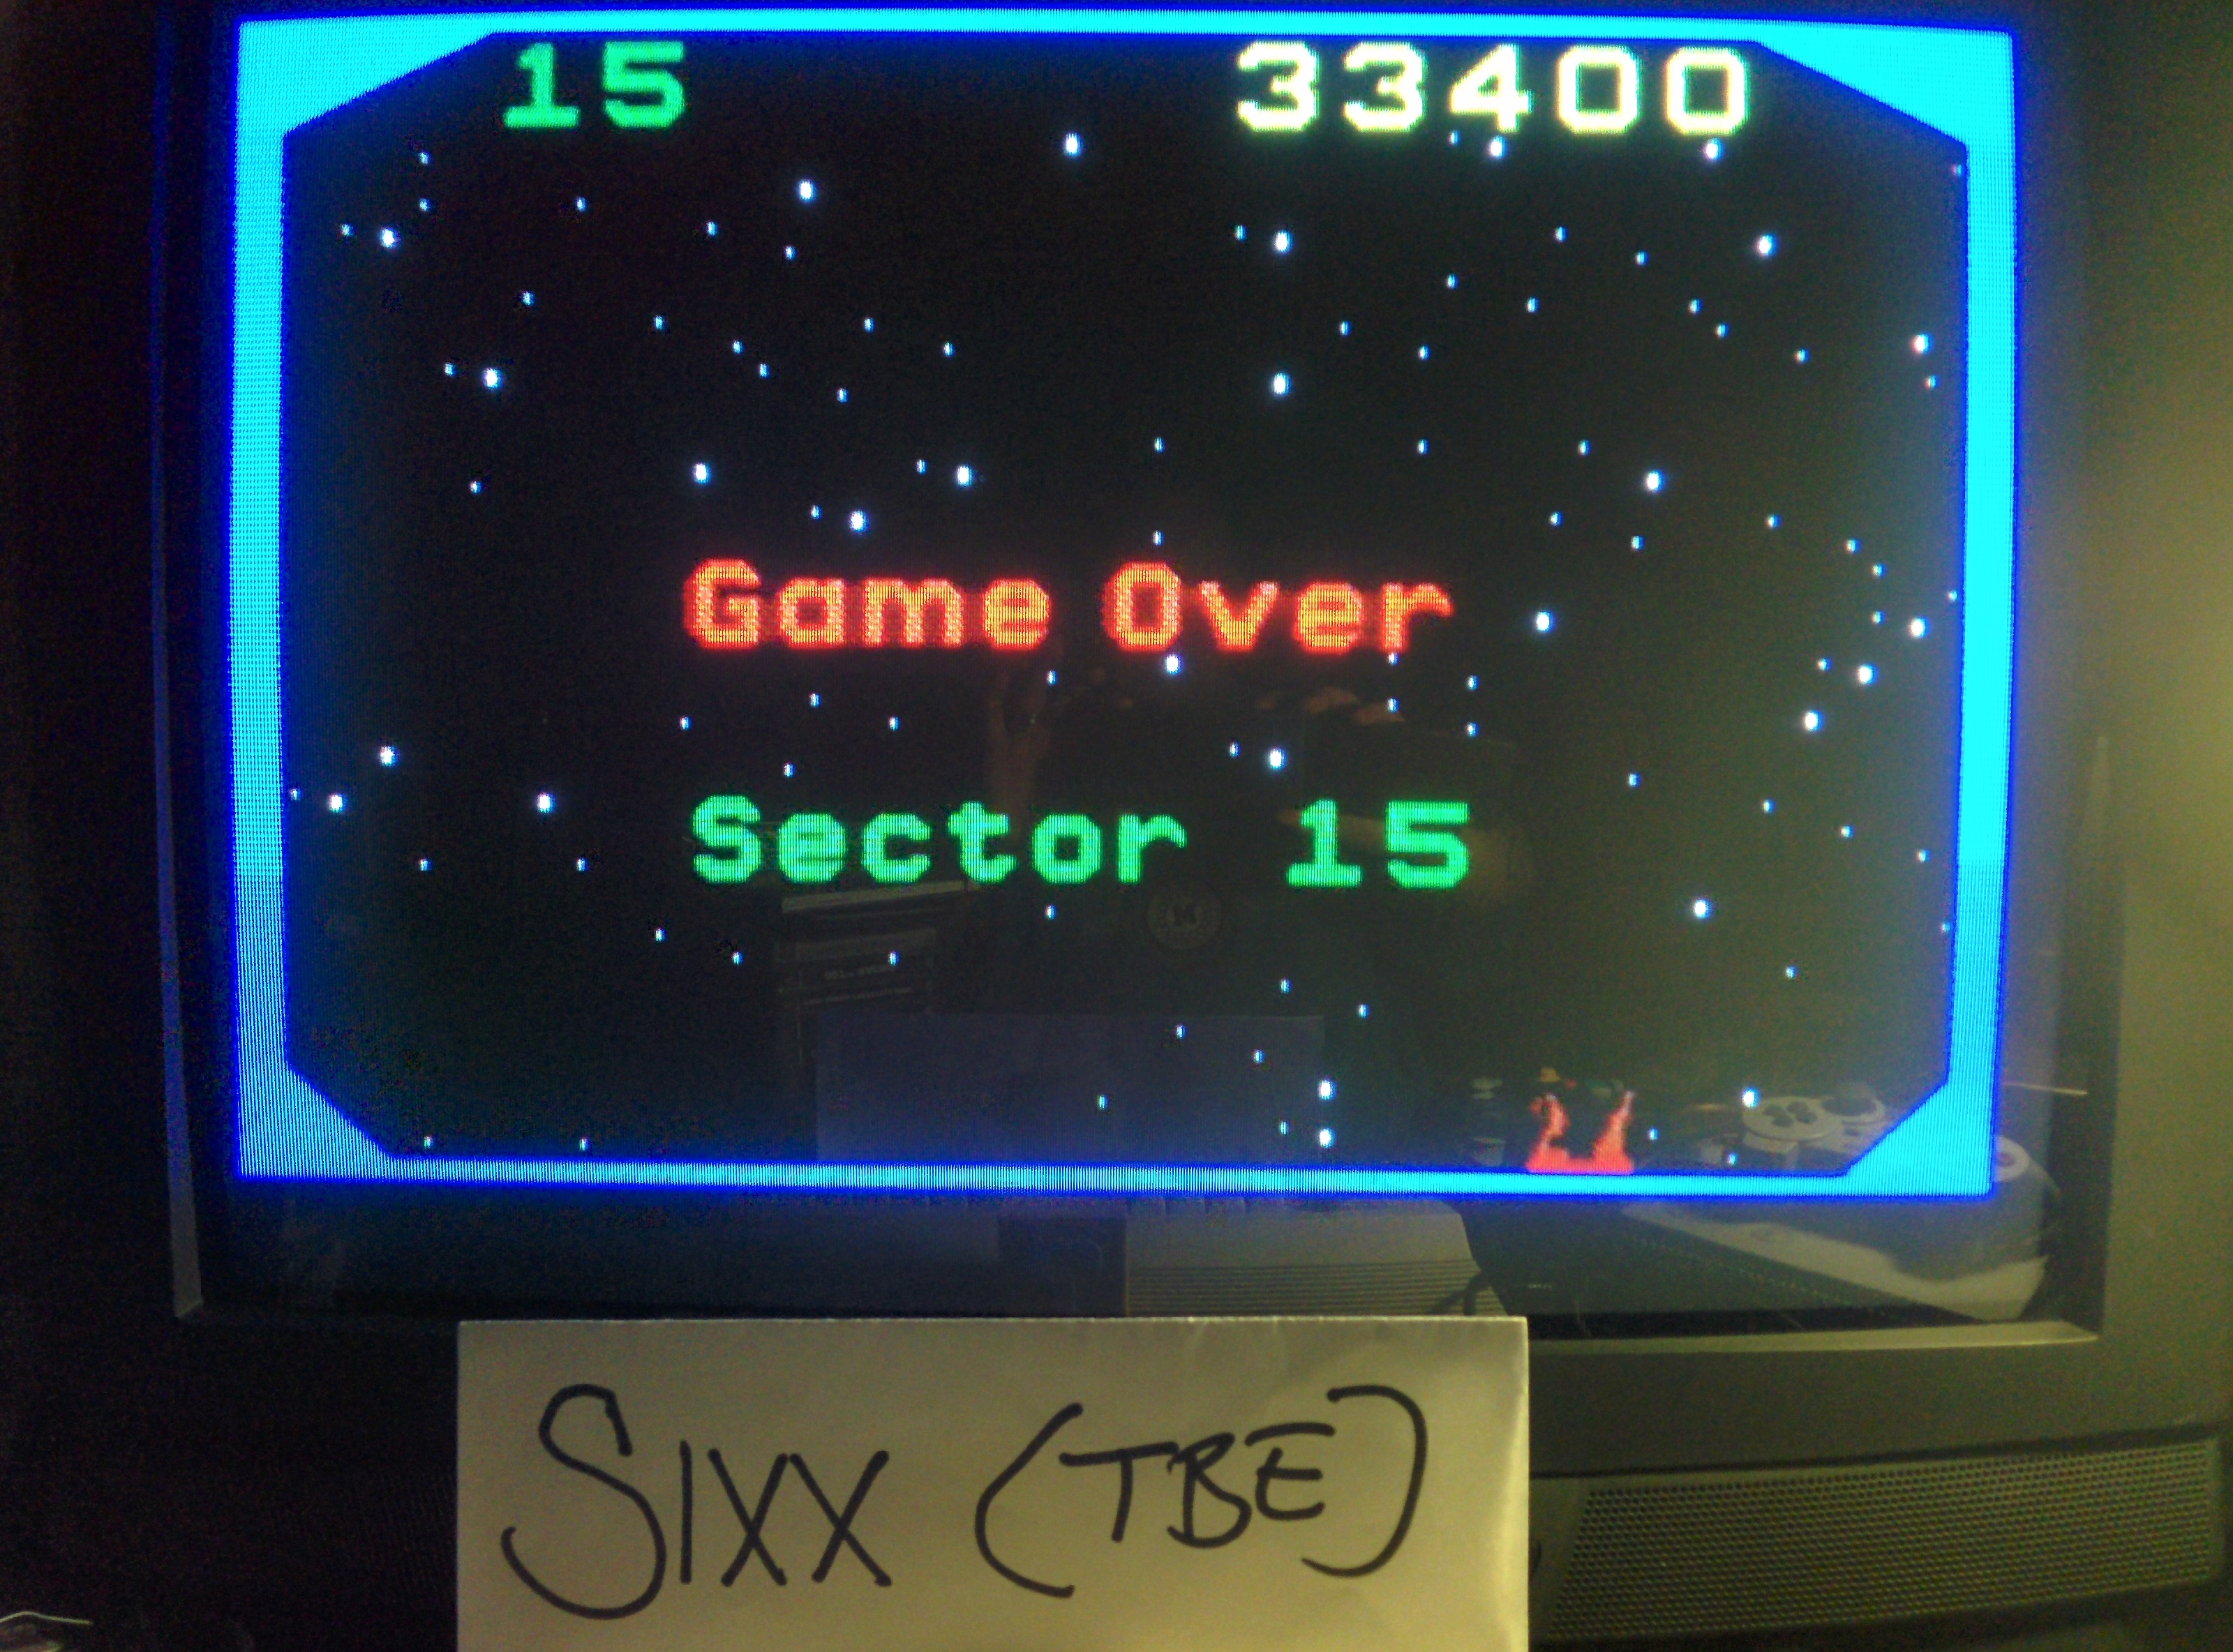 Sixx: Beamrider: Skill 1 (Colecovision Emulated) 33,400 points on 2014-05-20 19:22:06